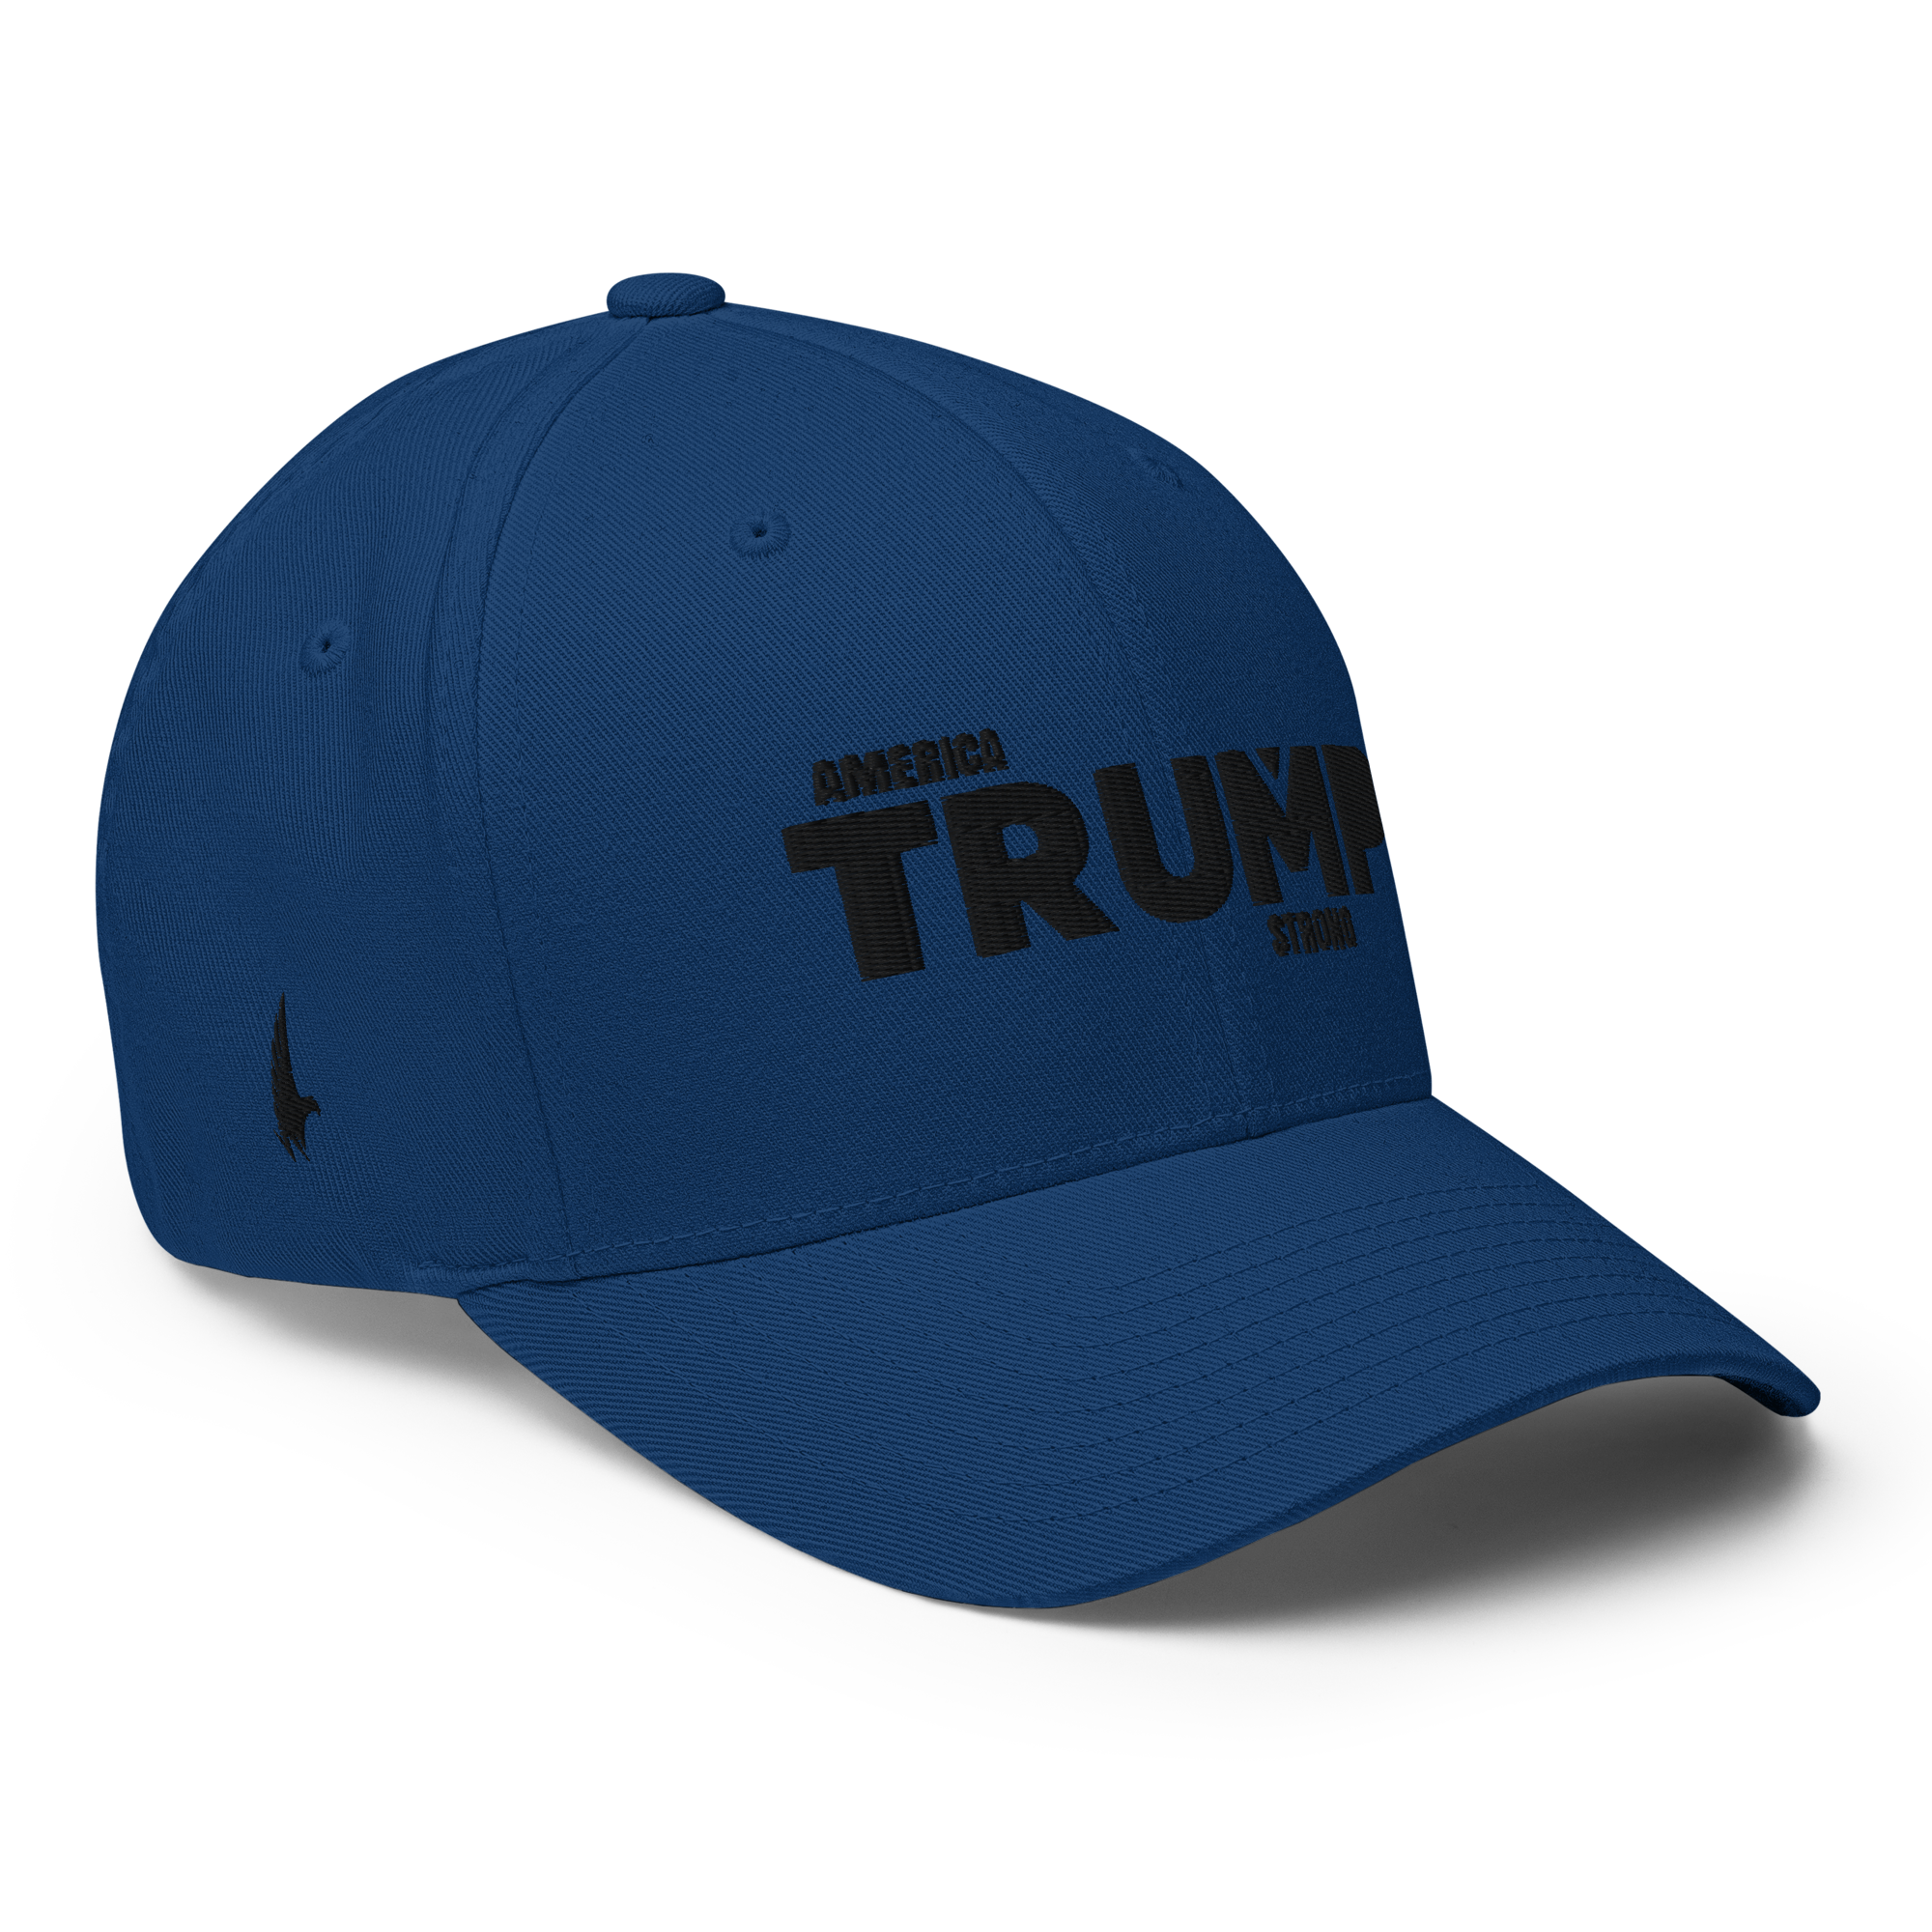 America Strong Trump Flexfit Hat - Blue / Black Fitted - Loyalty Vibes